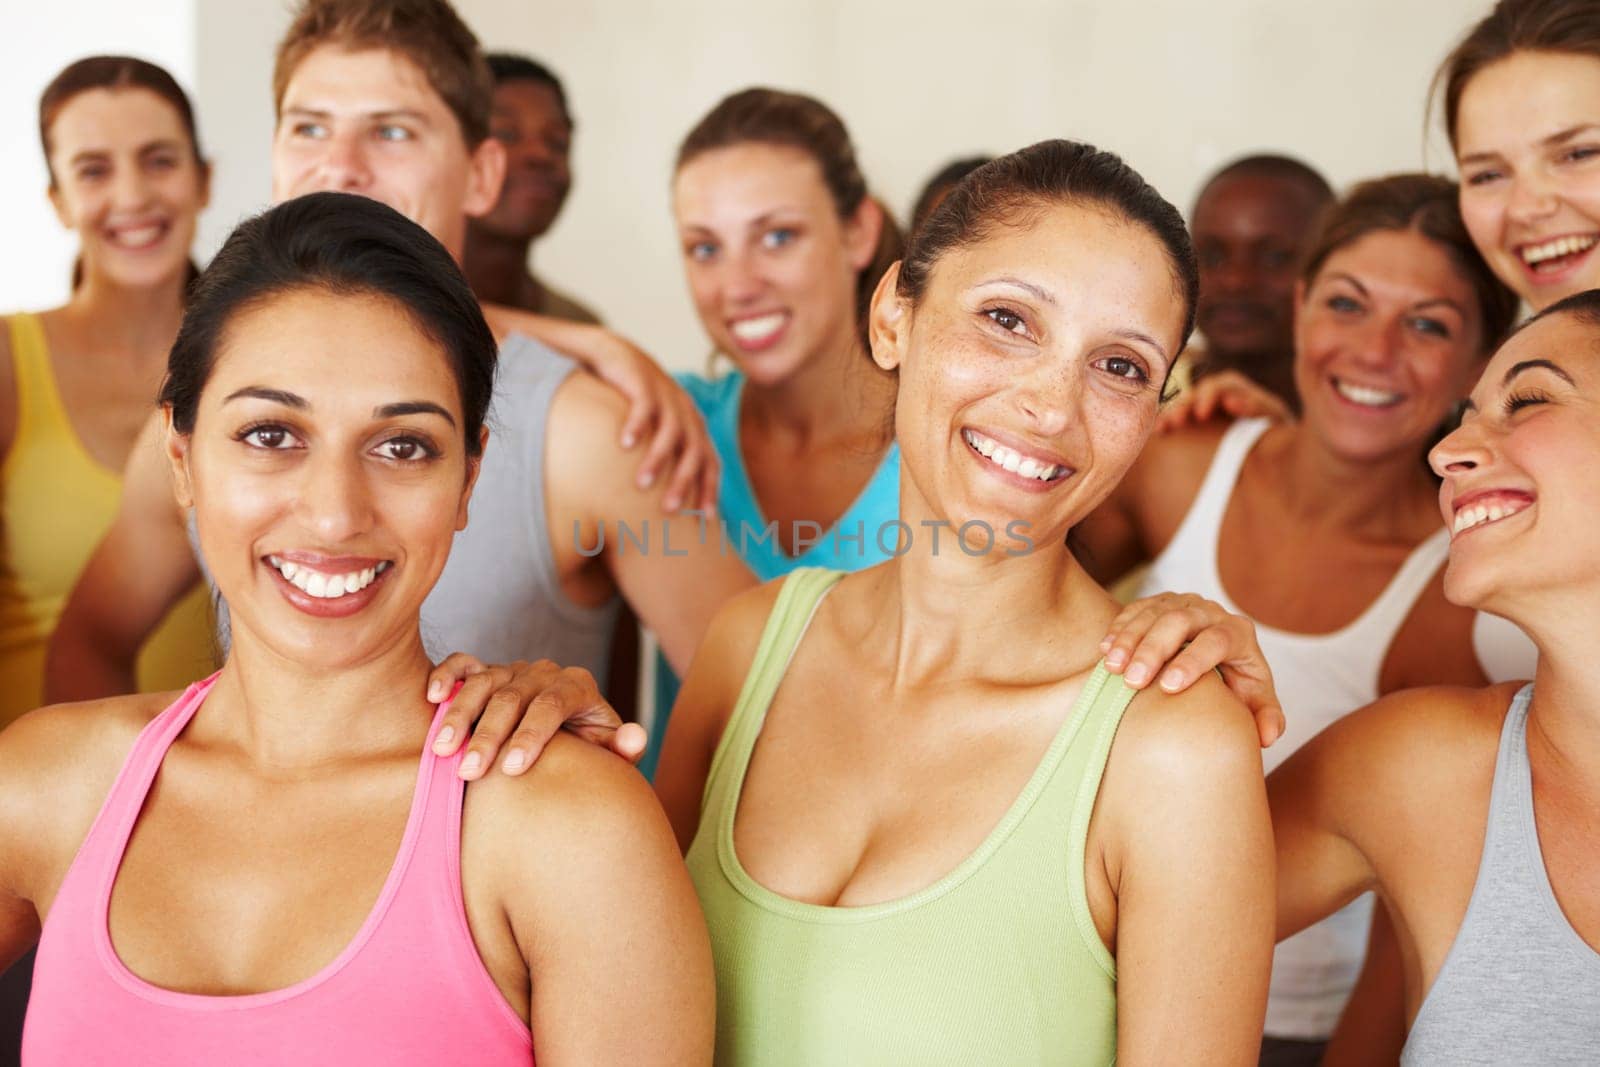 Keeping in shape makes them happy. Portrait of a a group of yoga enthusiasts standing in a yoga studio